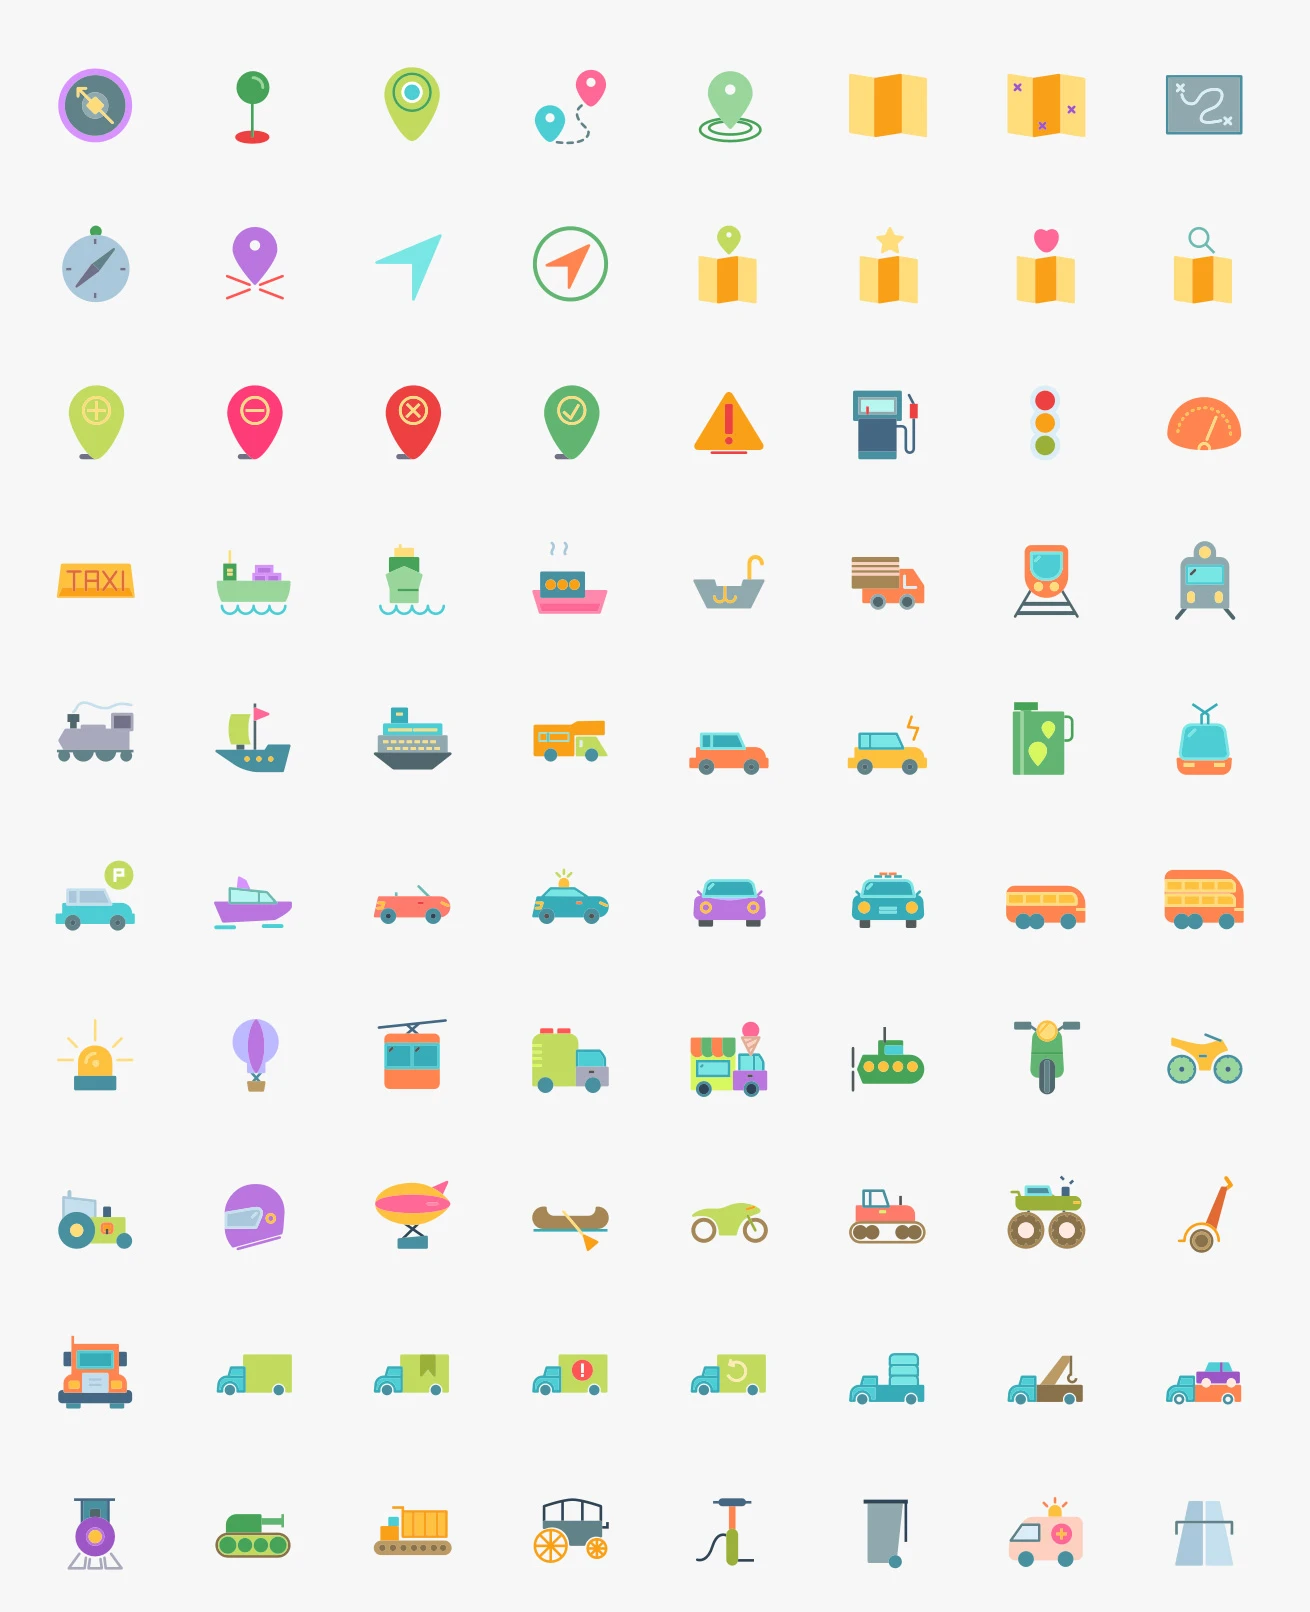 Transport & Household Free Icon Pack - 192 custom transport & household icons. Perfect for saving you time and adding a little vector flavor to your web and mobile designs. Use the household icons for a furniture store website or a DIY blog, or go nuts on a map app with the transportation icons.